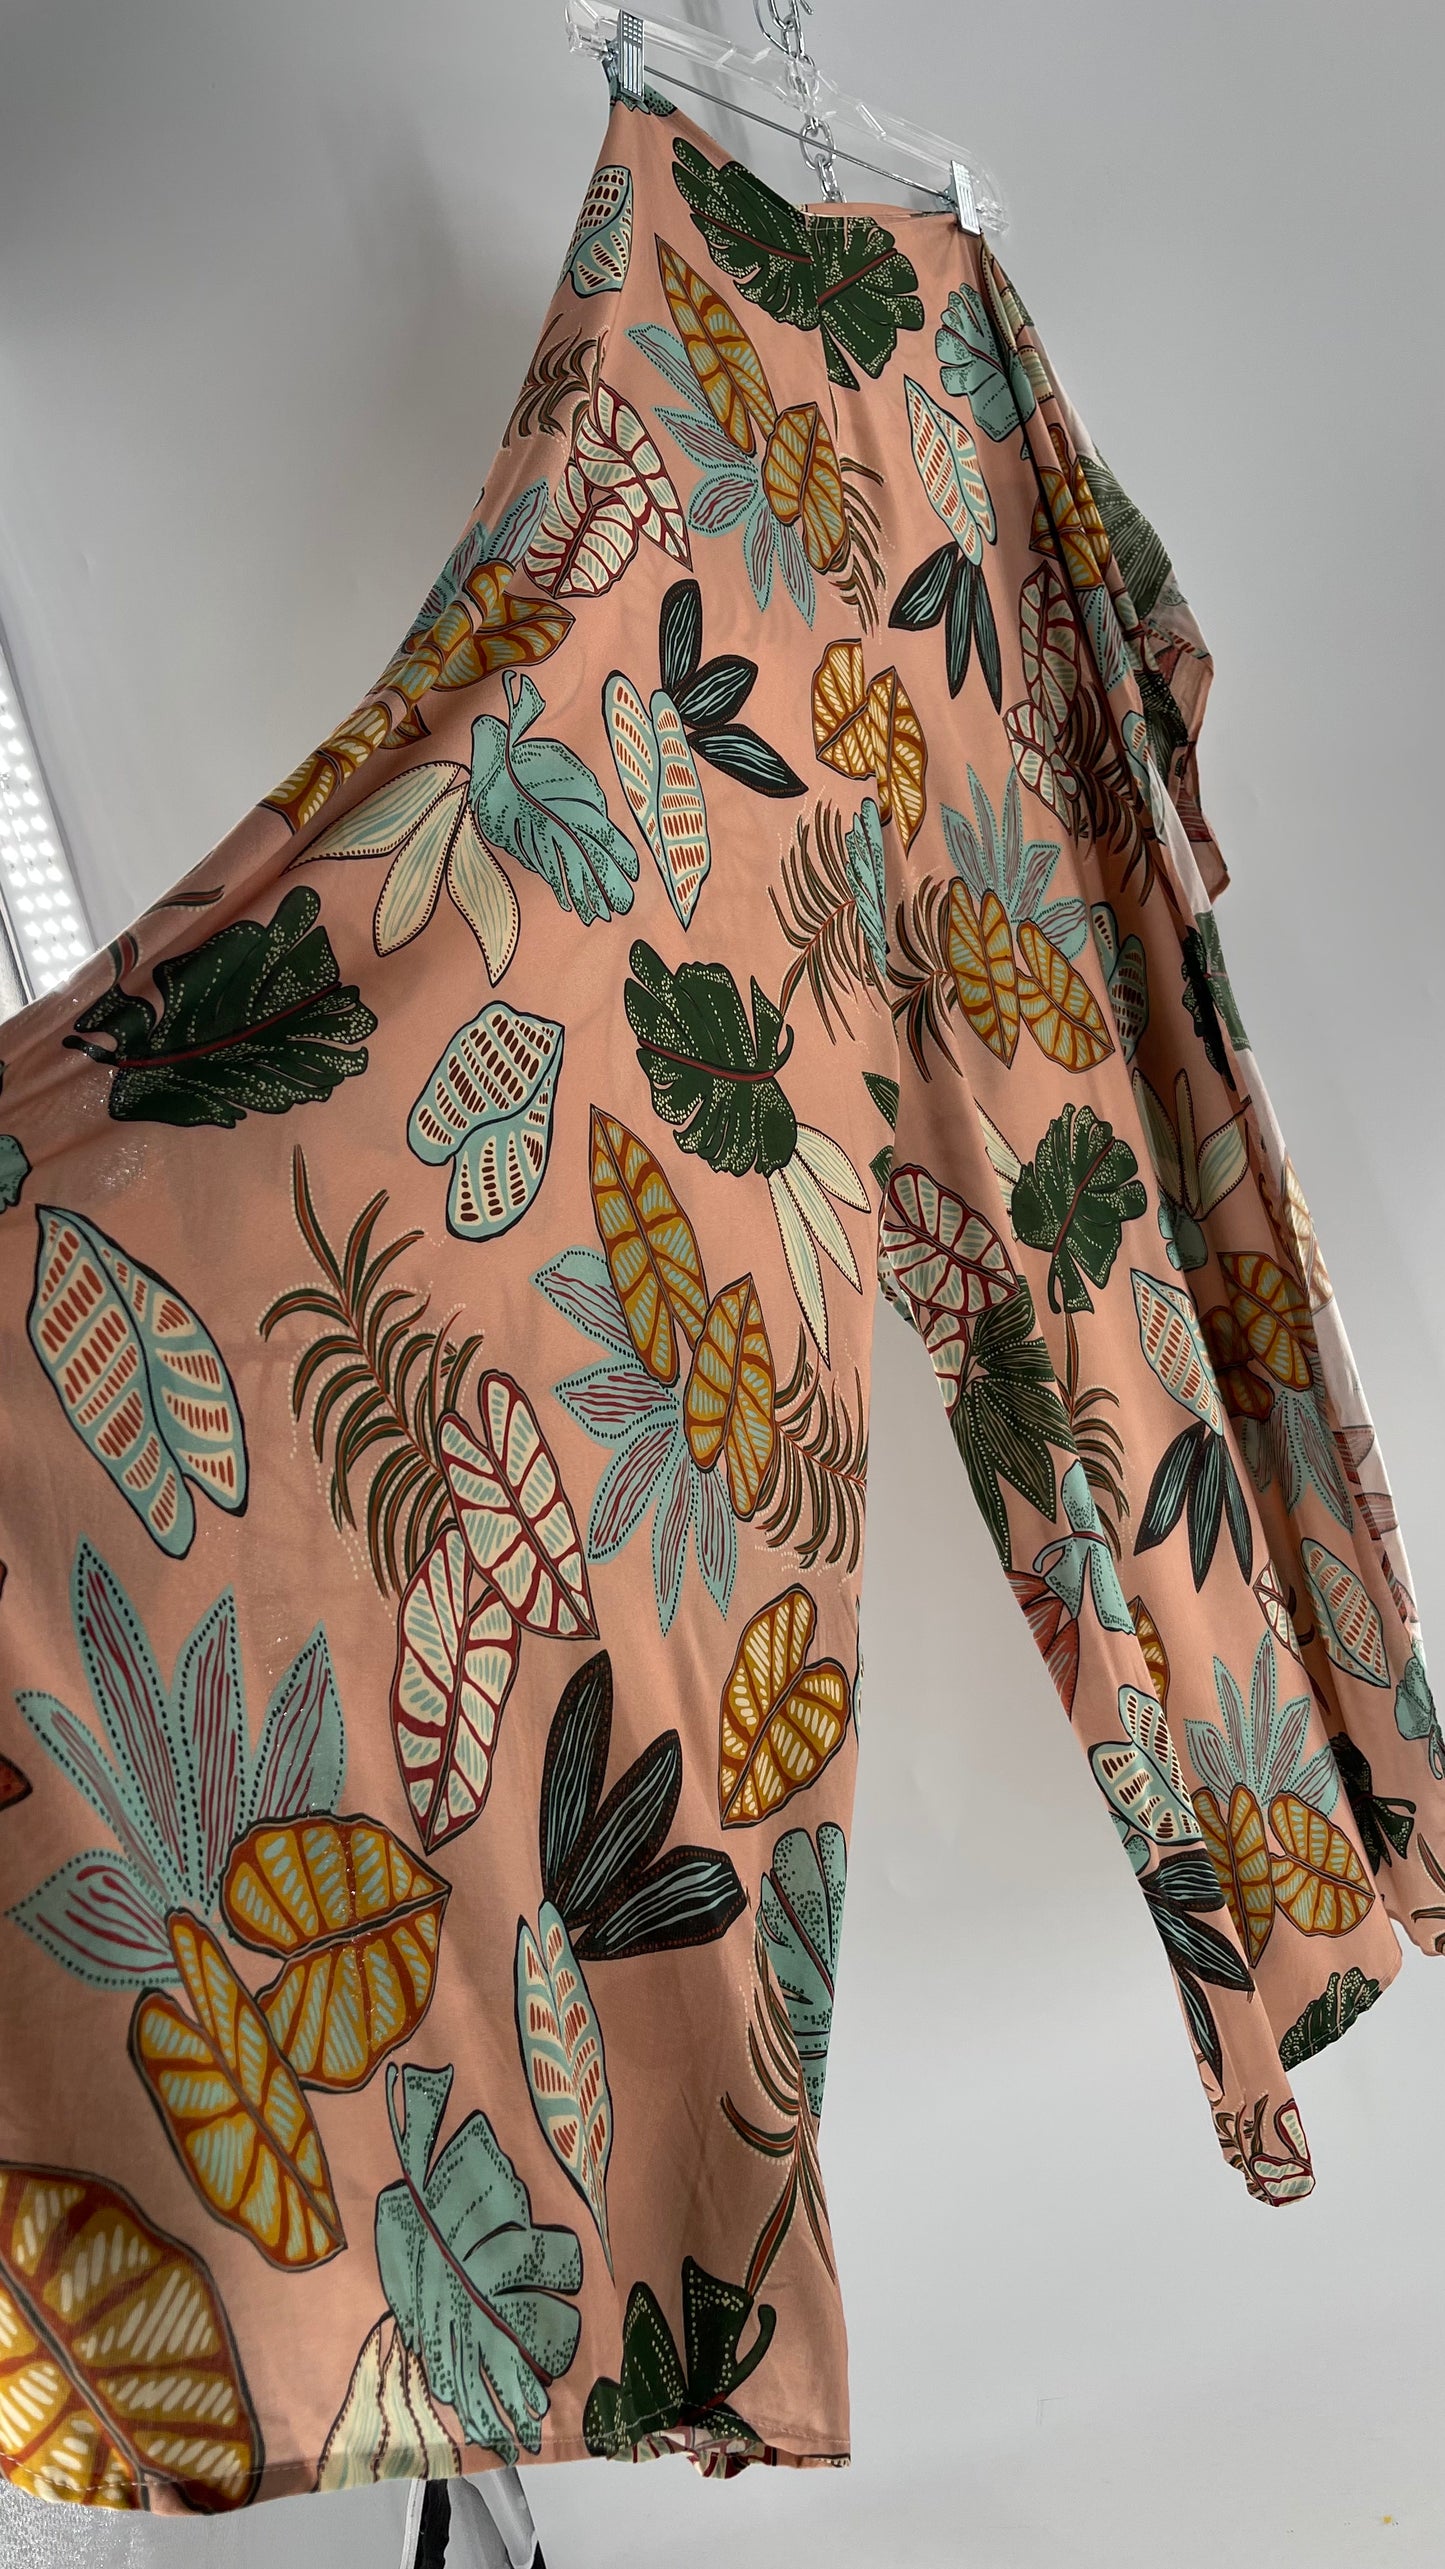 Handmade 9 in 1 Pink Jumpsuit Covered in Tropical Doodle Leaf Design (One Size) •AS SEEN ON TIKTOK•